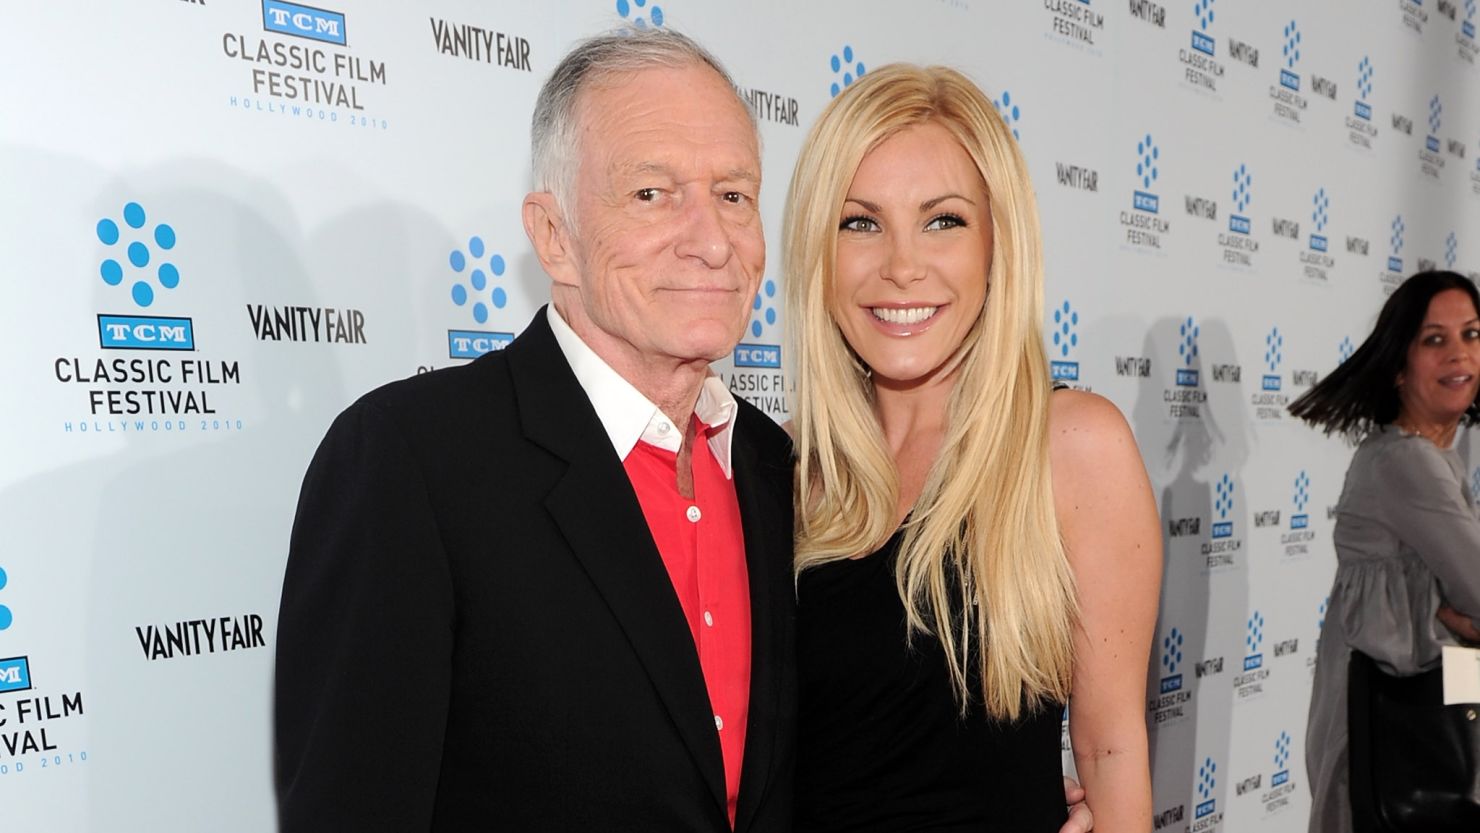 Hugh Hefner insists he "missed a bullet" by not tying the knot with Crystal Harris.